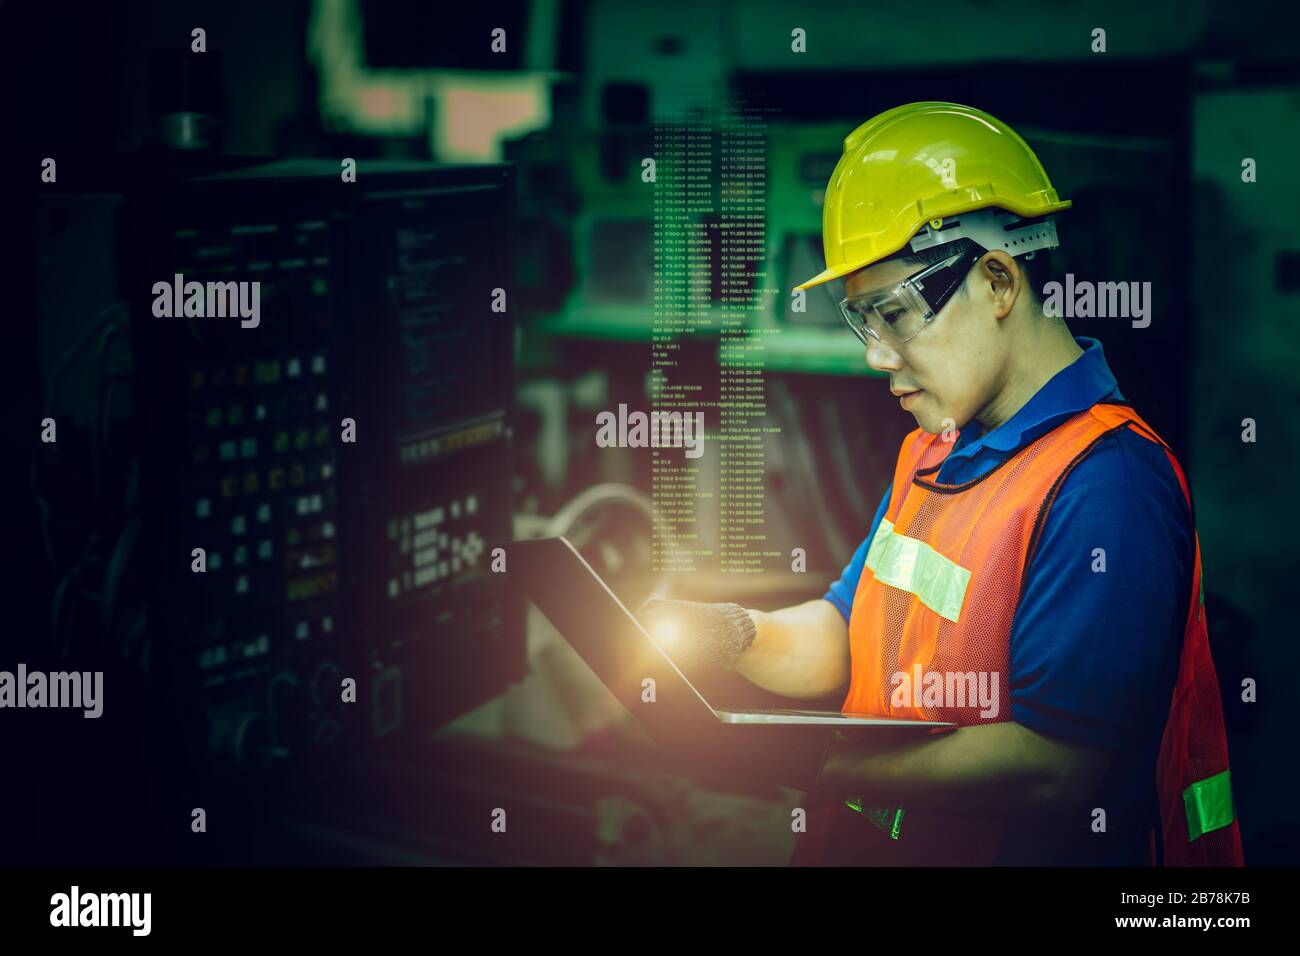 worker operate CNC machine with G-Code monitor, high skill labor work industry with safety clothes dark green color tone for high technology skill con Stock Photo